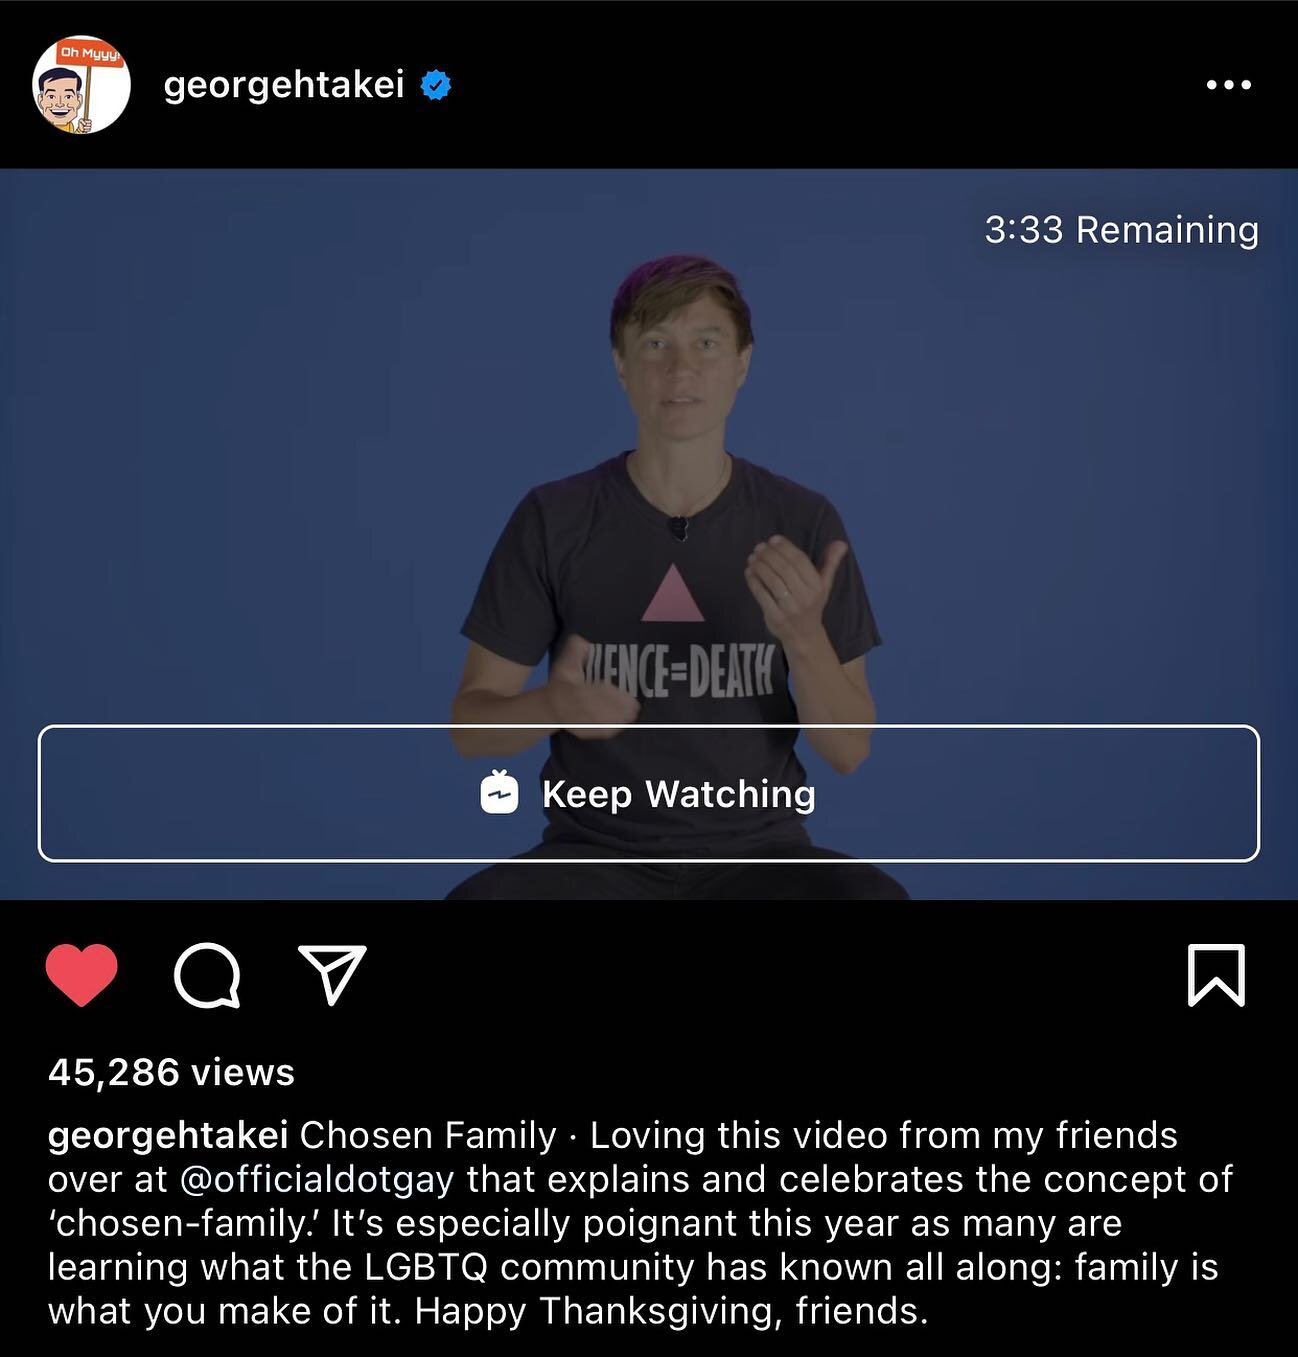 We are most #thankful for when @georgehtakei reposts our @officialdotgay web series #TheLibrary over the holiday weekend. Thanks George!!!! 🌈

#regram @georgehtakei

Chosen Family

Loving this video from my friends over at @officialdotgay that expla